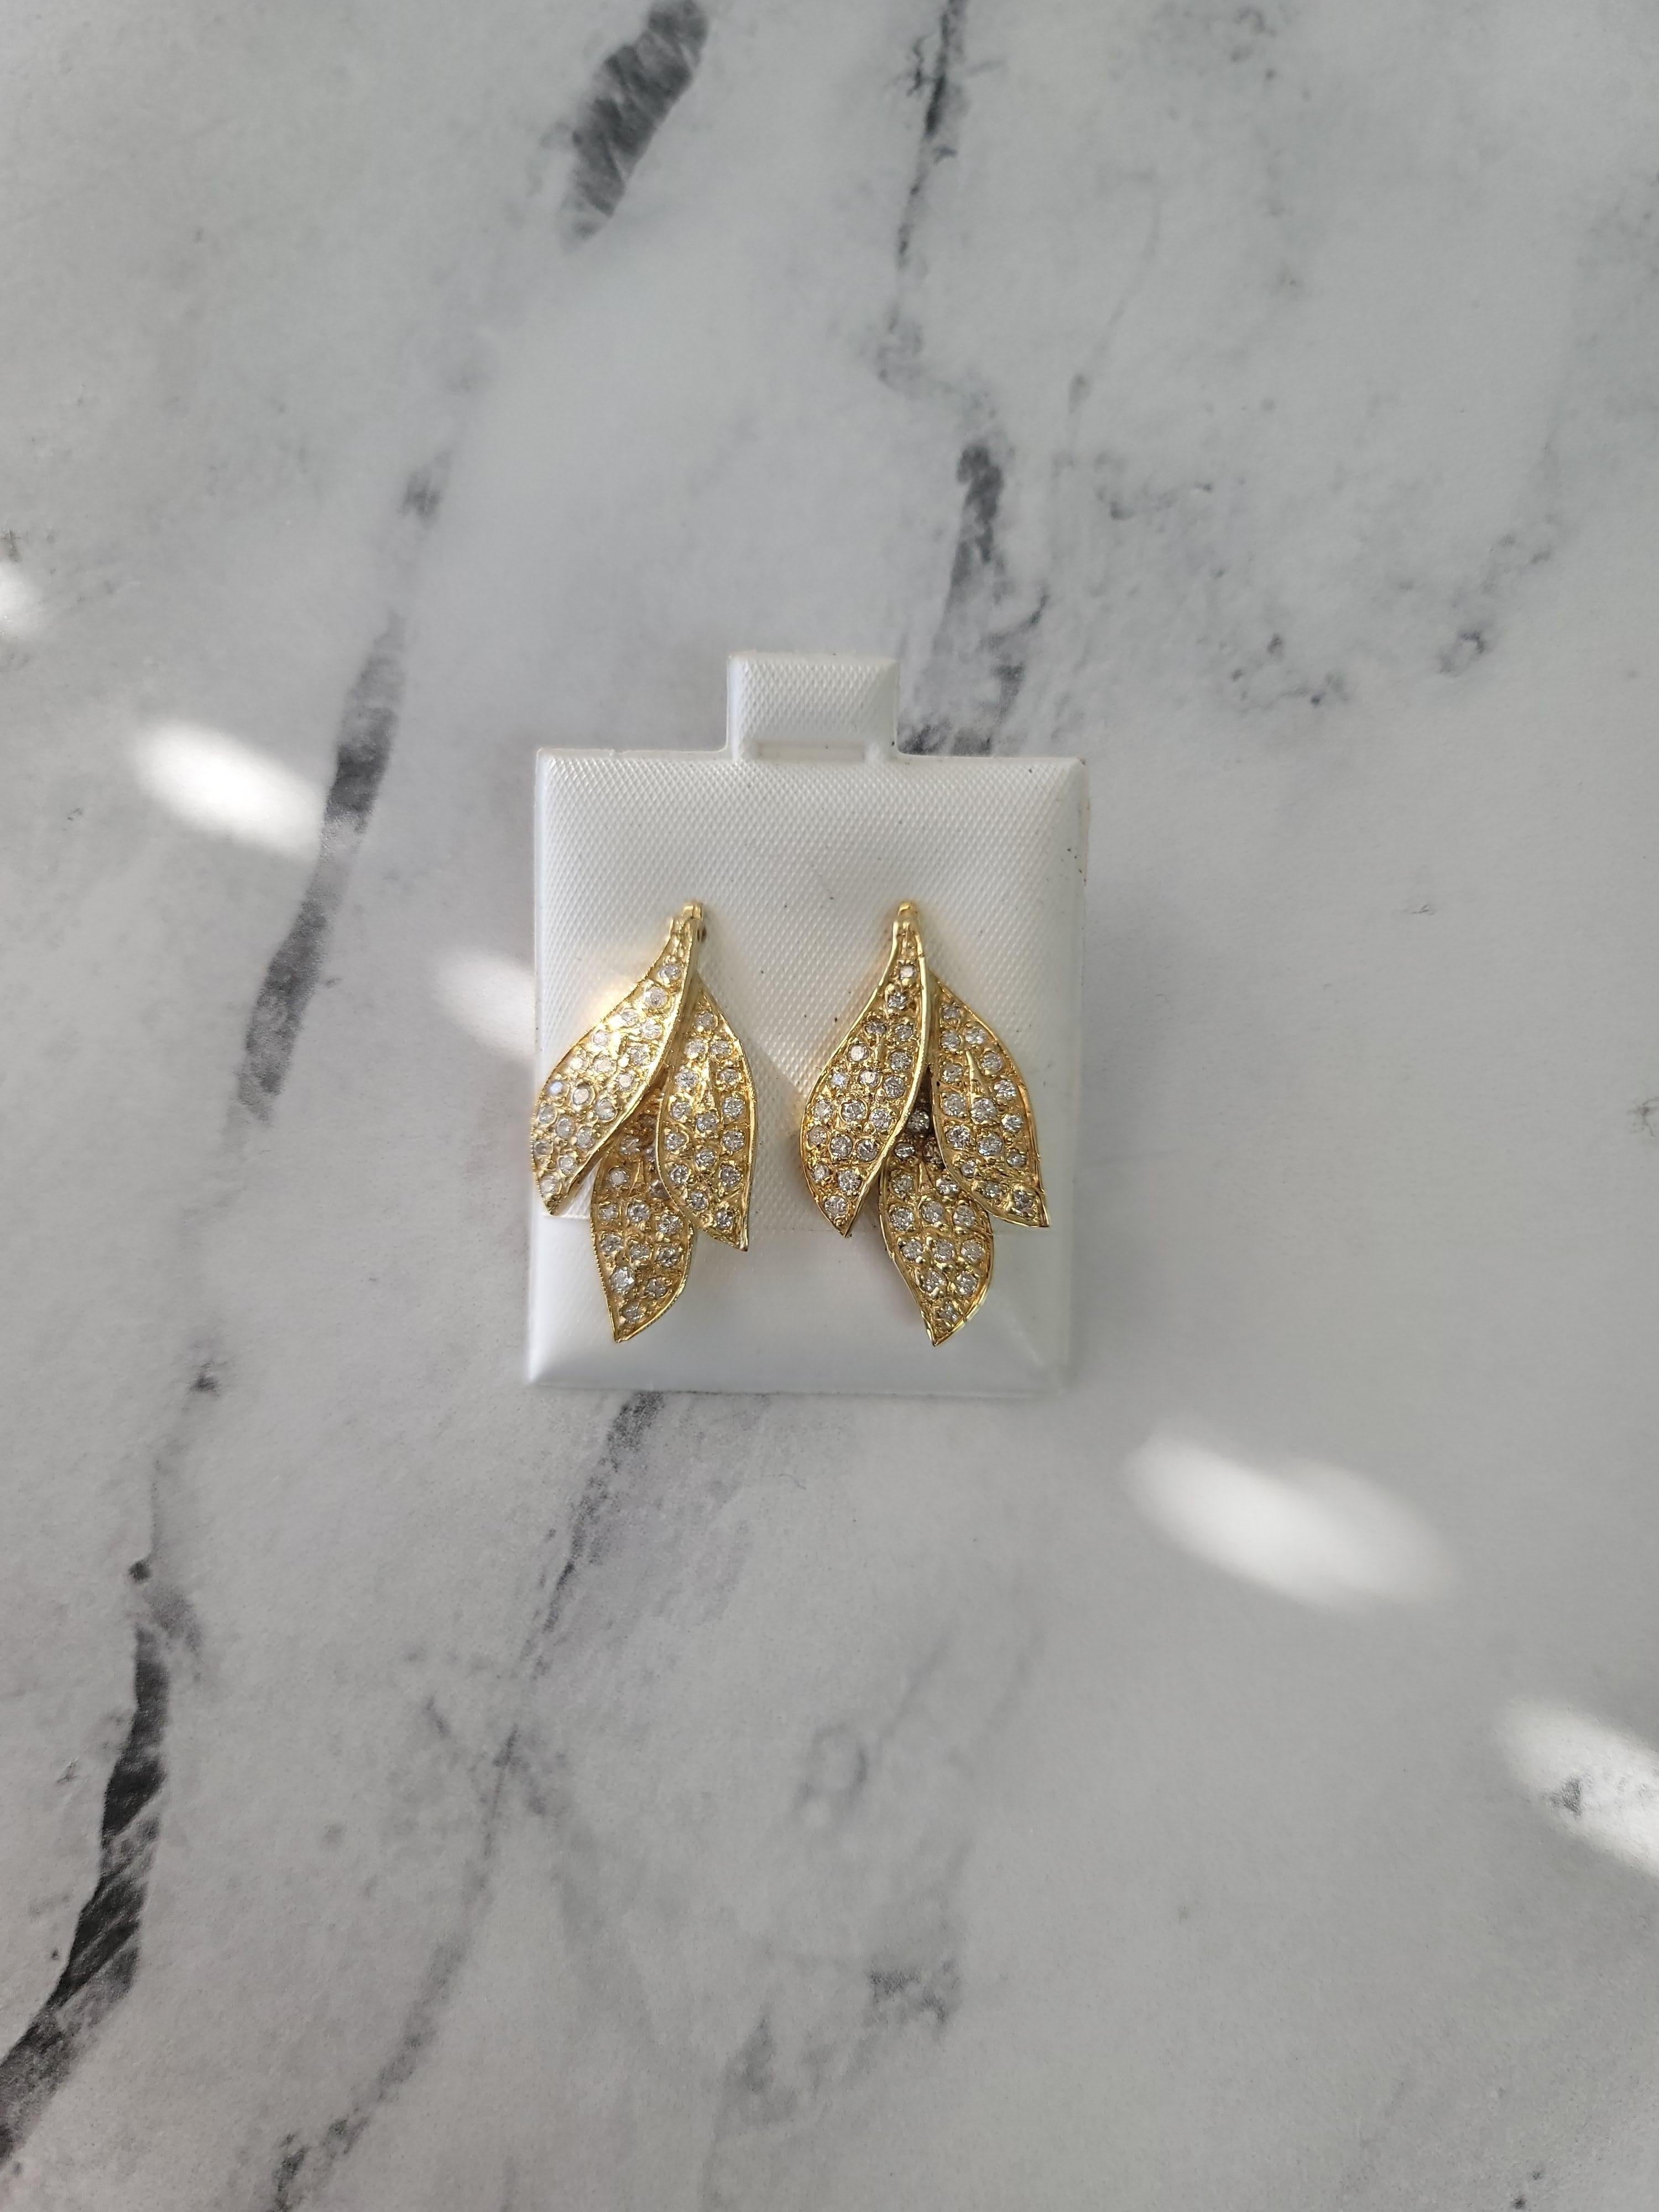 Pave Leaf Shaped Diamond Earrings 1.00cttw 14k Yellow Gold In New Condition For Sale In Sugar Land, TX